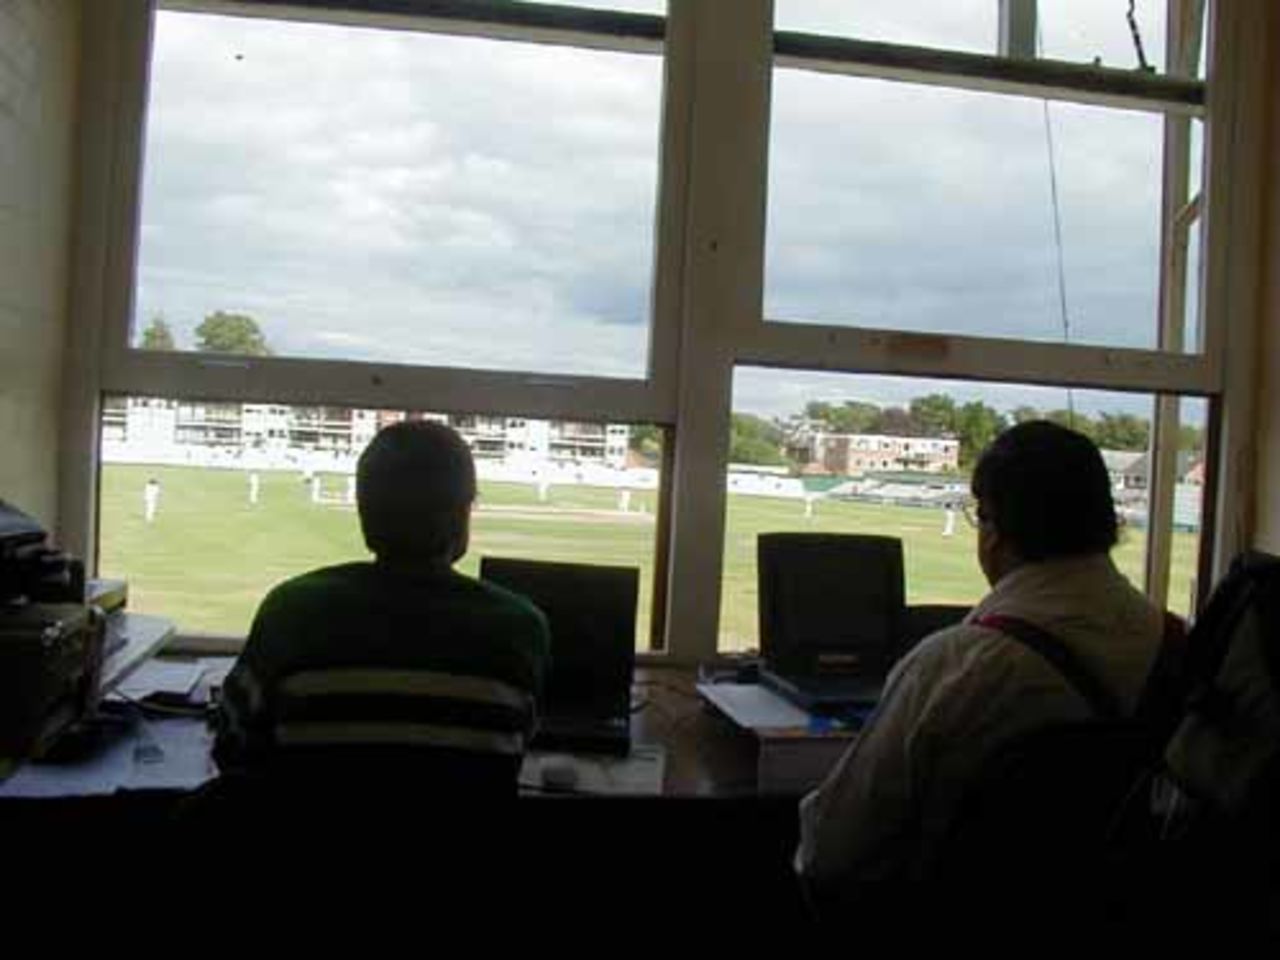 Scorers look out on final day scene